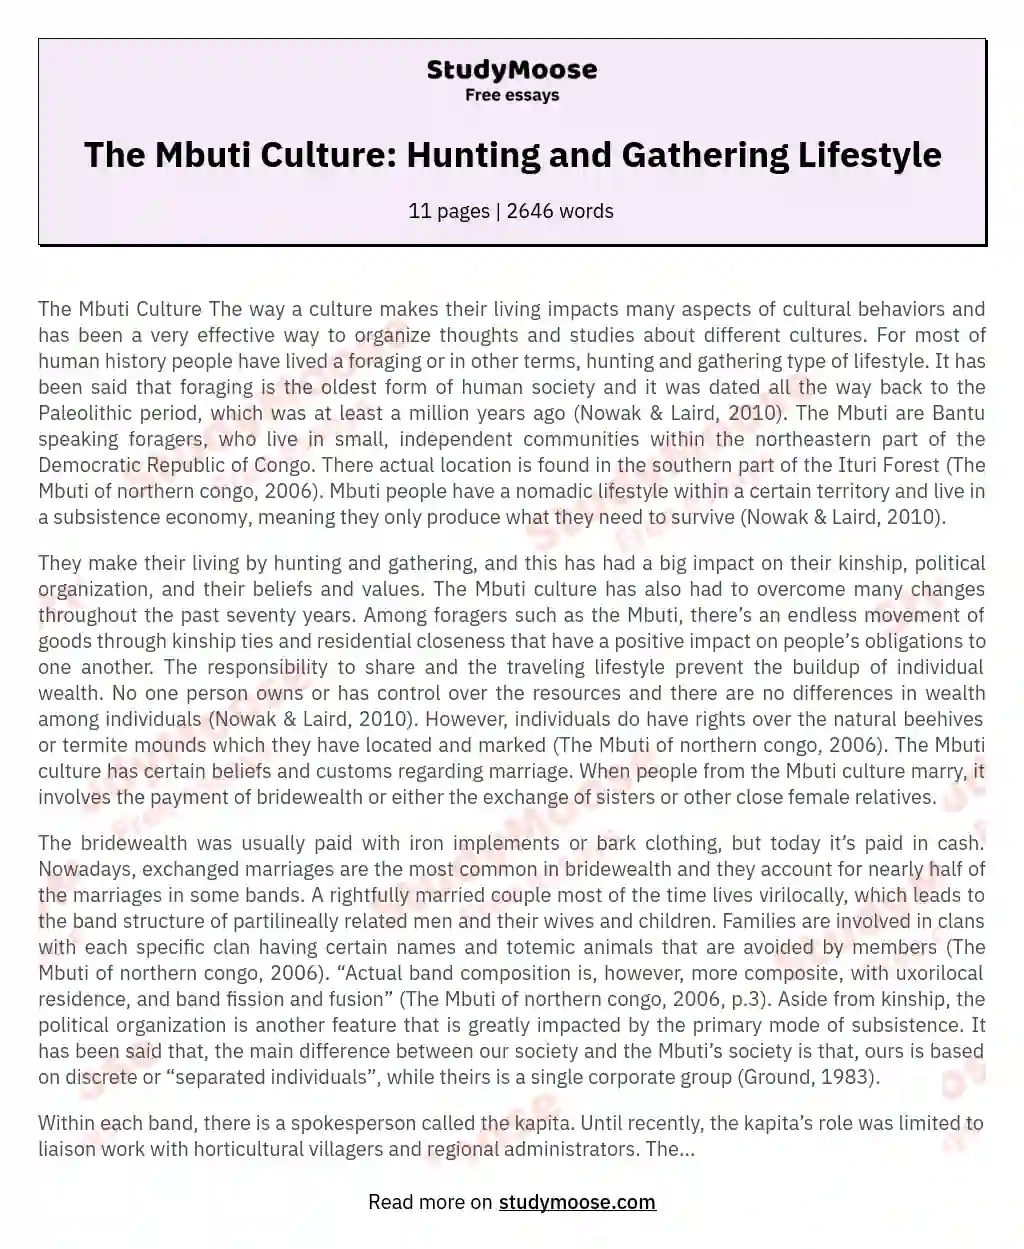 The Mbuti Culture: Hunting and Gathering Lifestyle essay